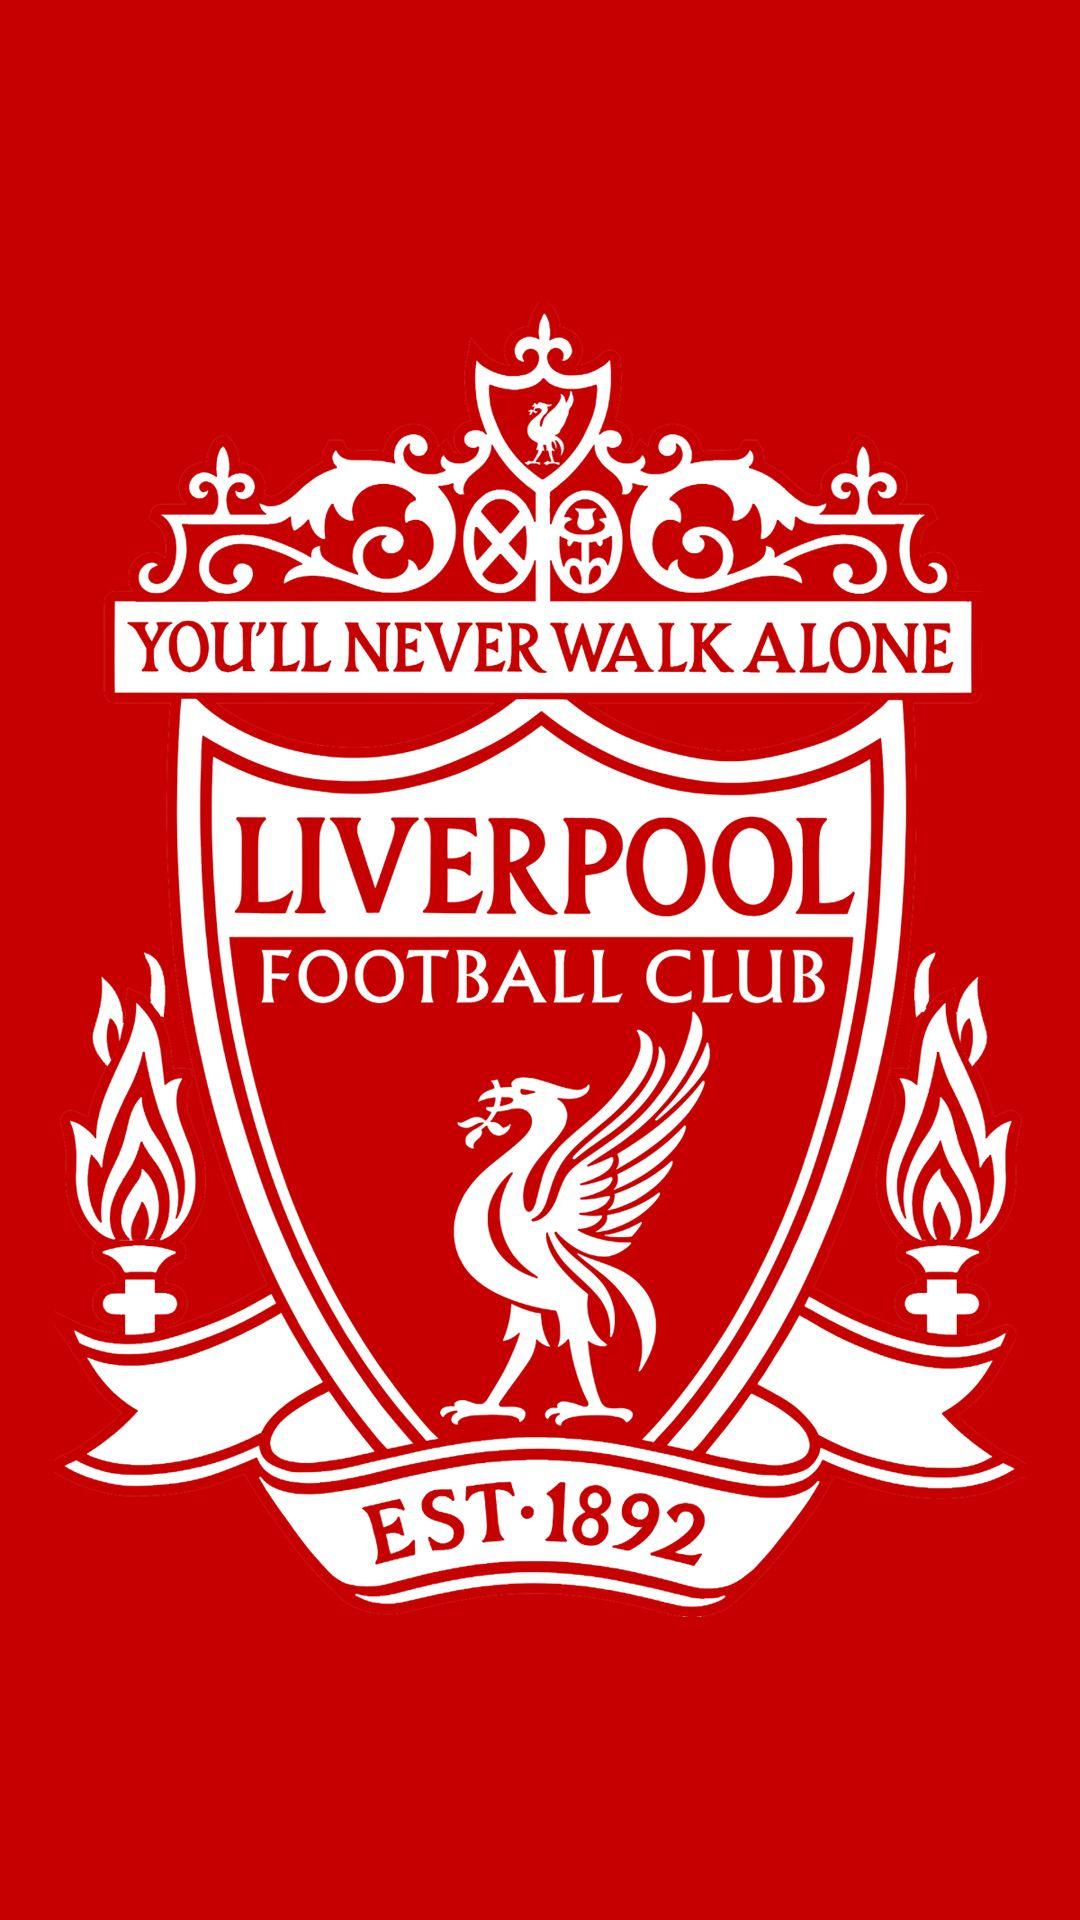 Plus White On Red Background Logo - LFC iPhone 6 Plus Wallpaper